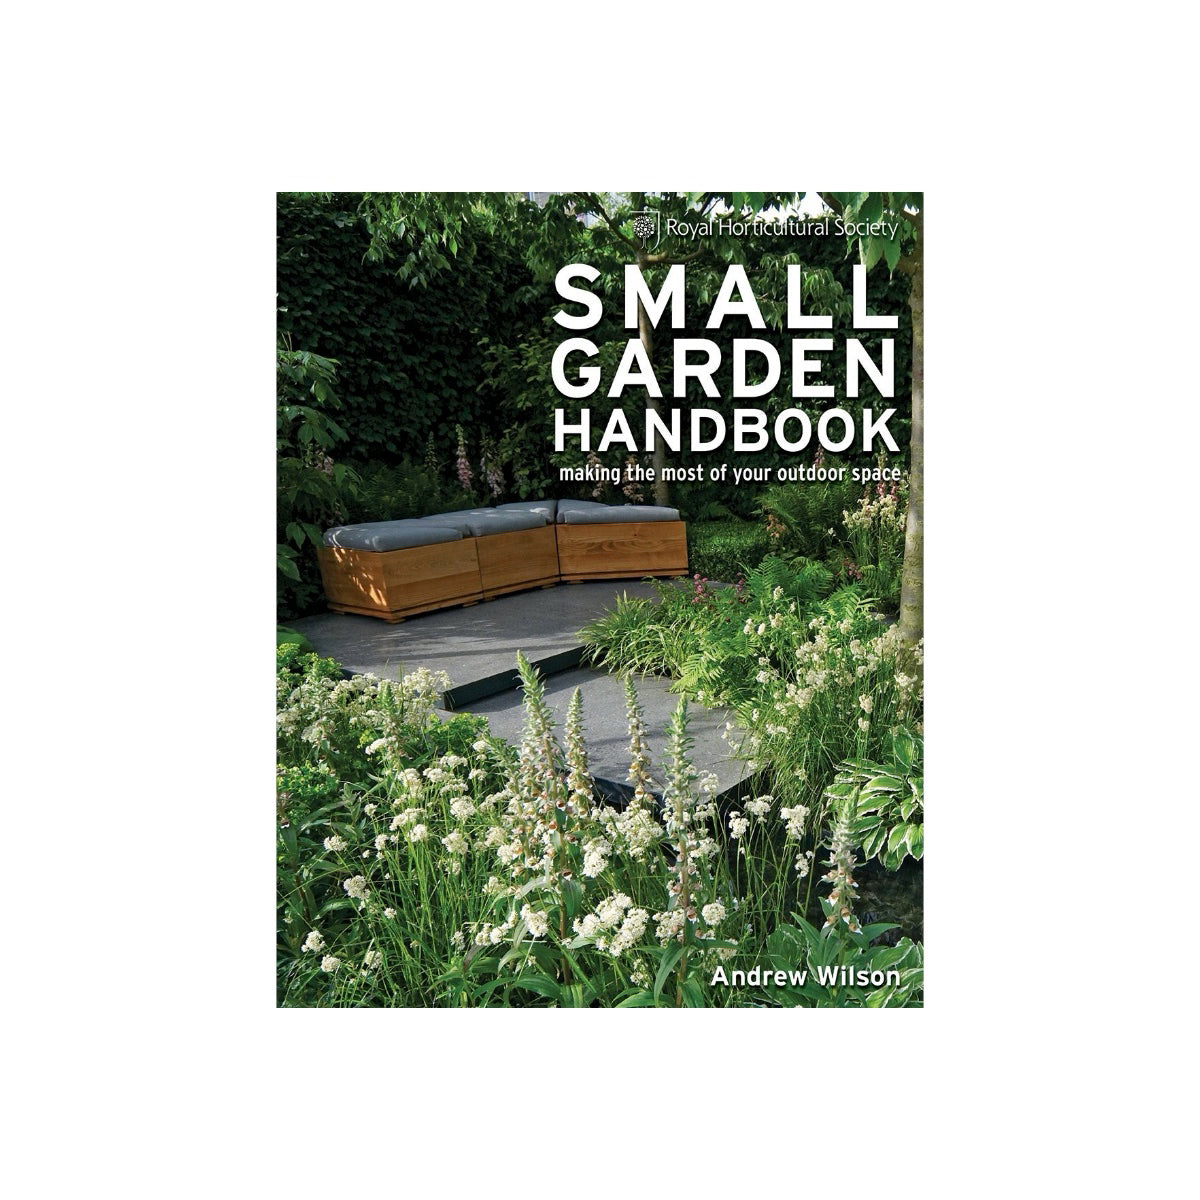 Small Garden Handbook: Making the Most of Your Outdoor Space